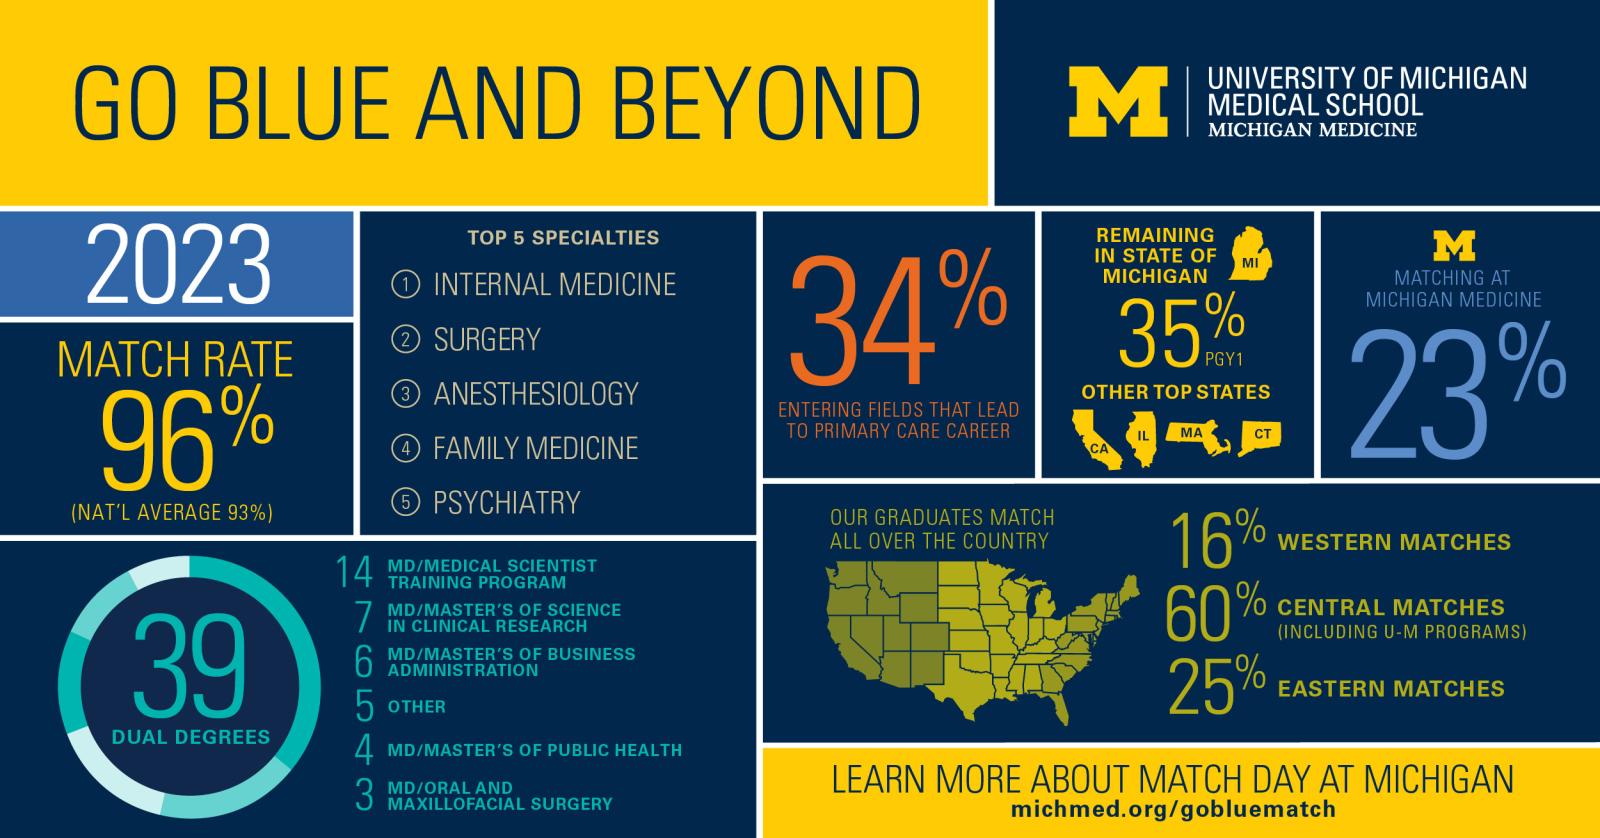 Go Blue and Beyond Infographic Top 5 Specialities 1 Internal Medicine 2 Surgery 3 Anesthesiology 4 Family Medicine 5 Psychiatry